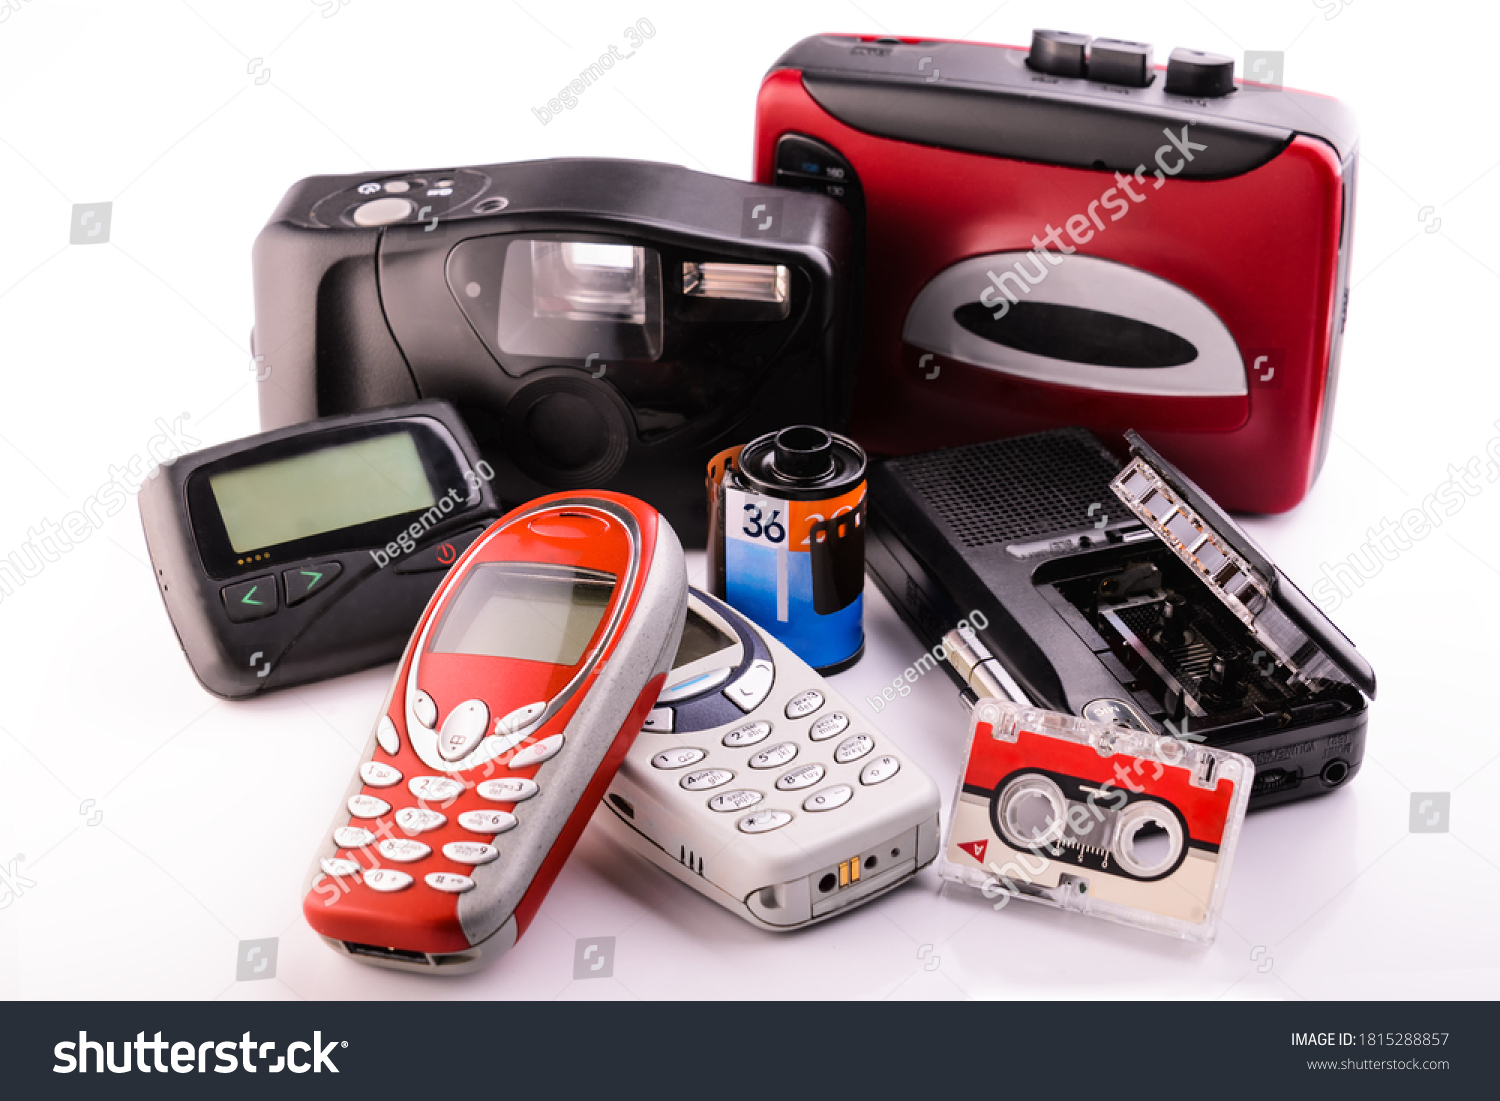 old obsolete items collected in a group on white background #1815288857